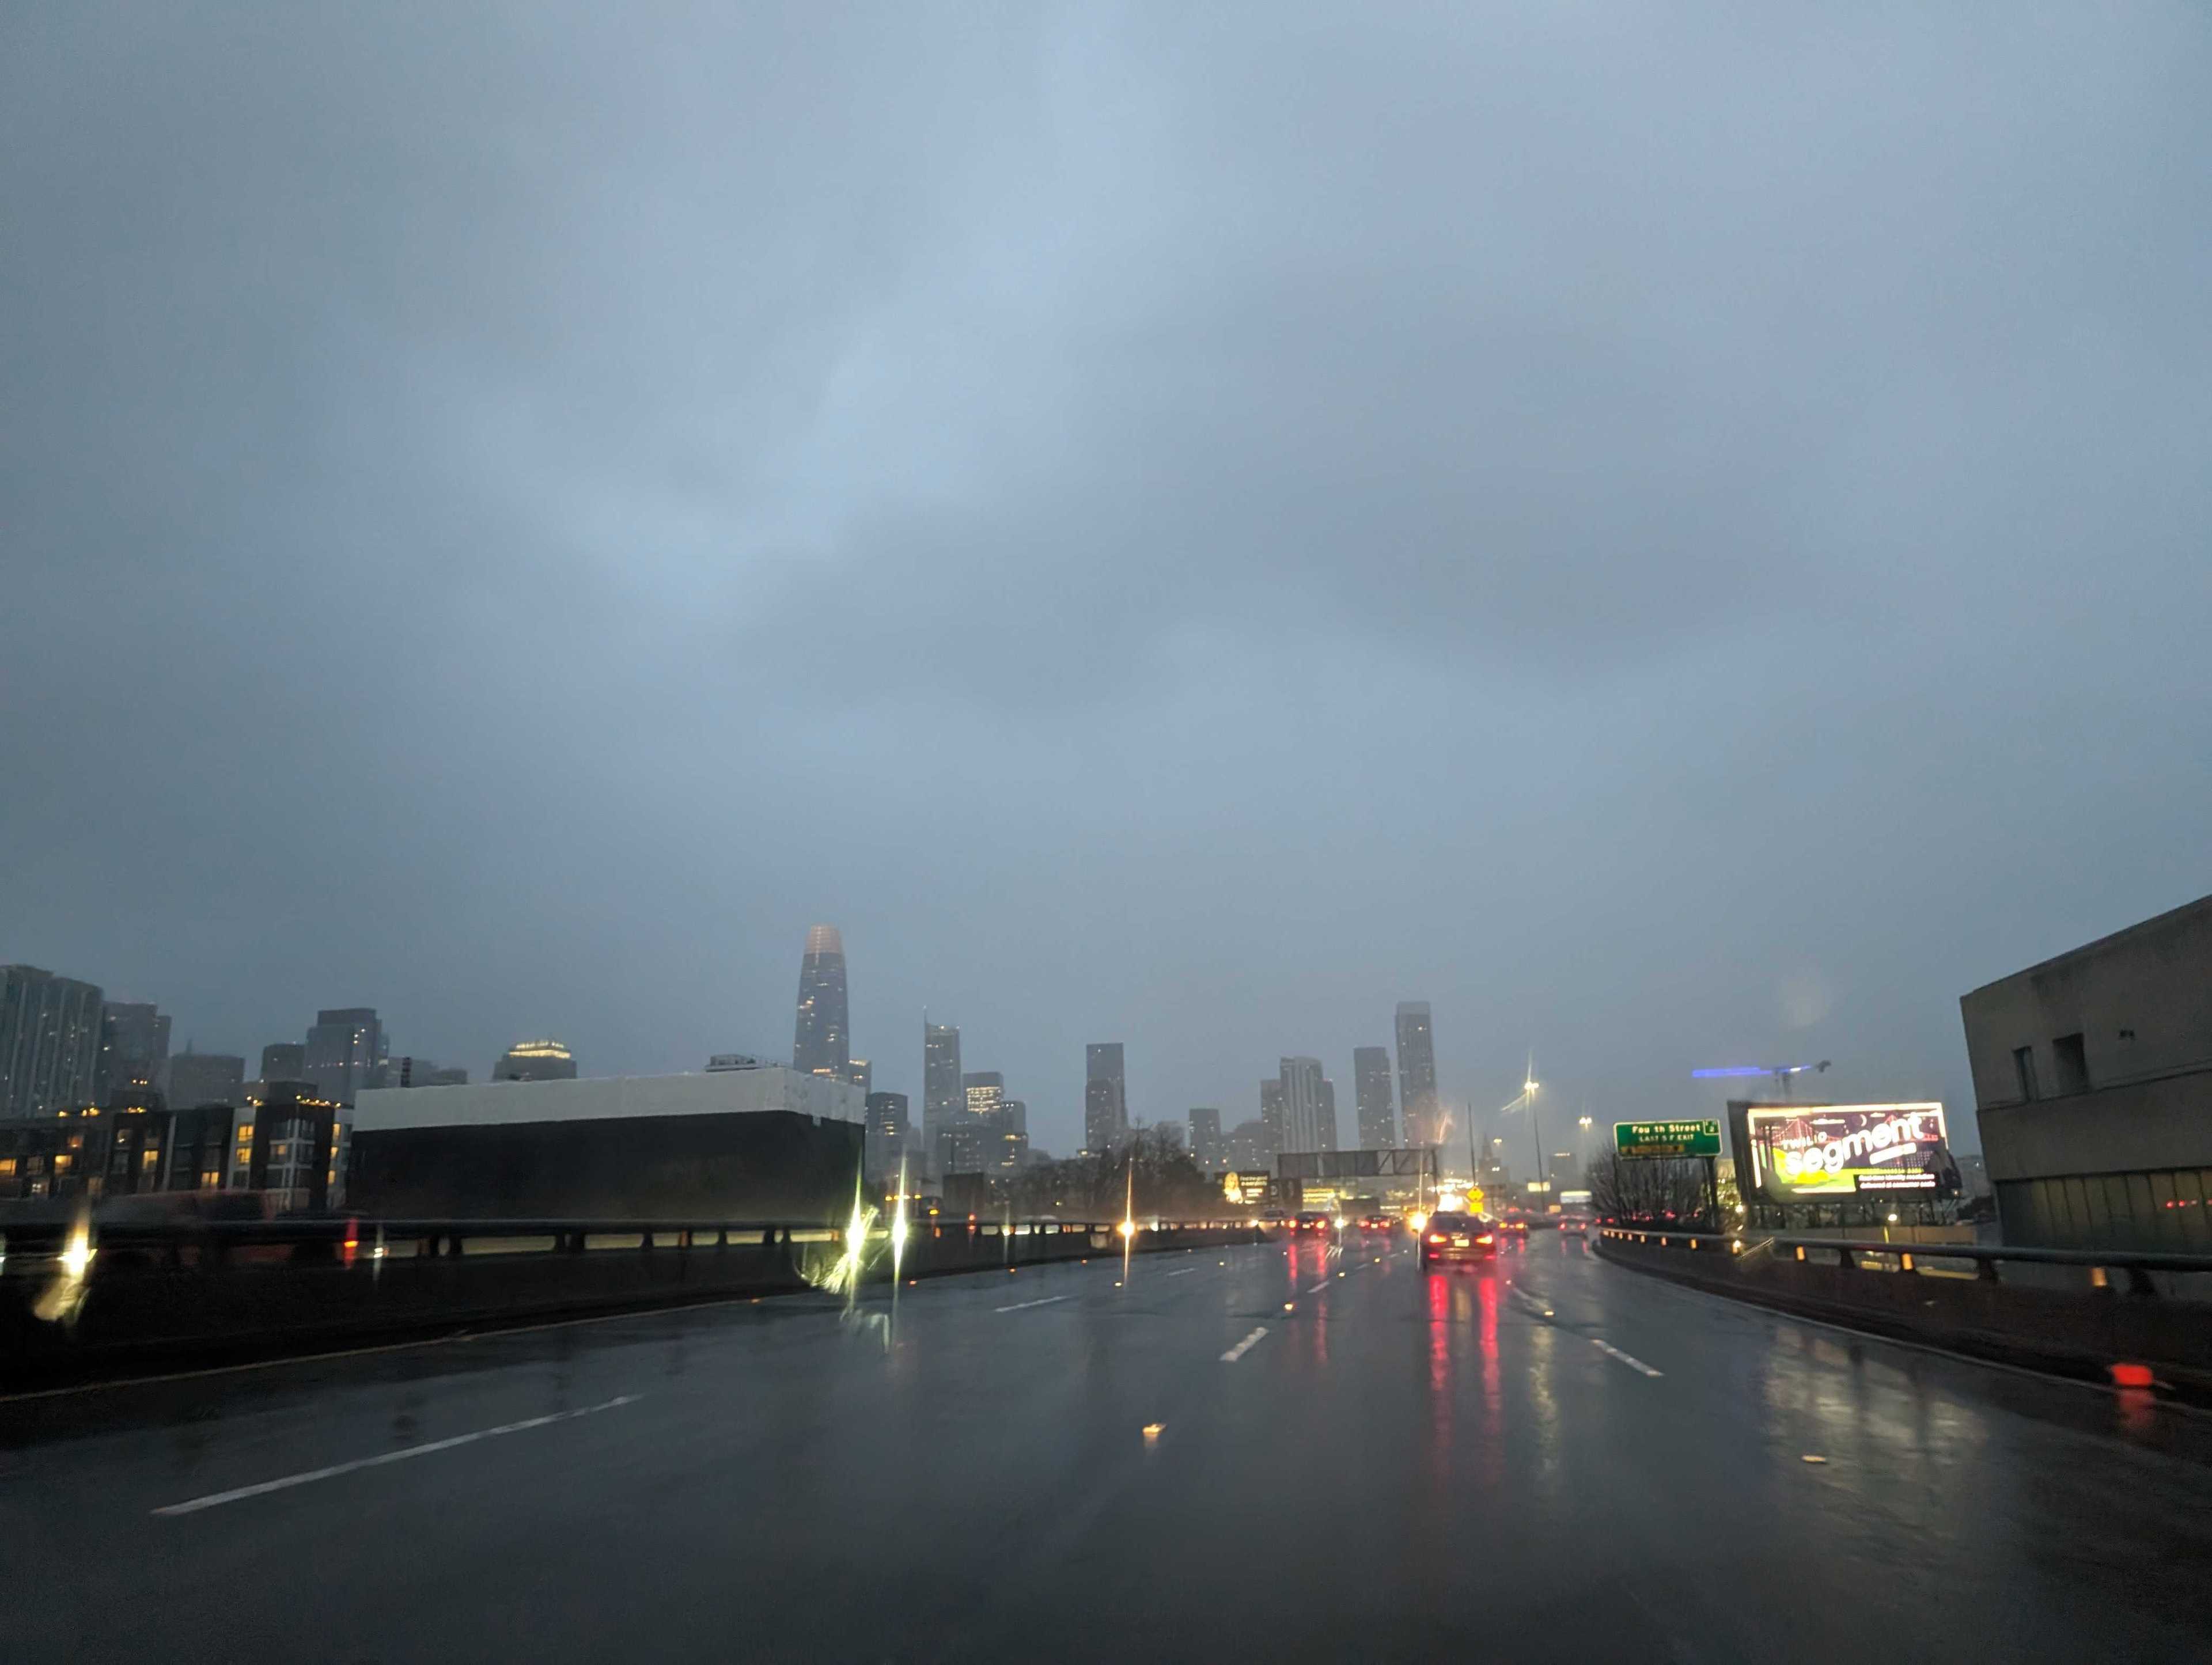 A city skyline nearby as seen from an elevated freeway with sparse traffic in rainy twilight.